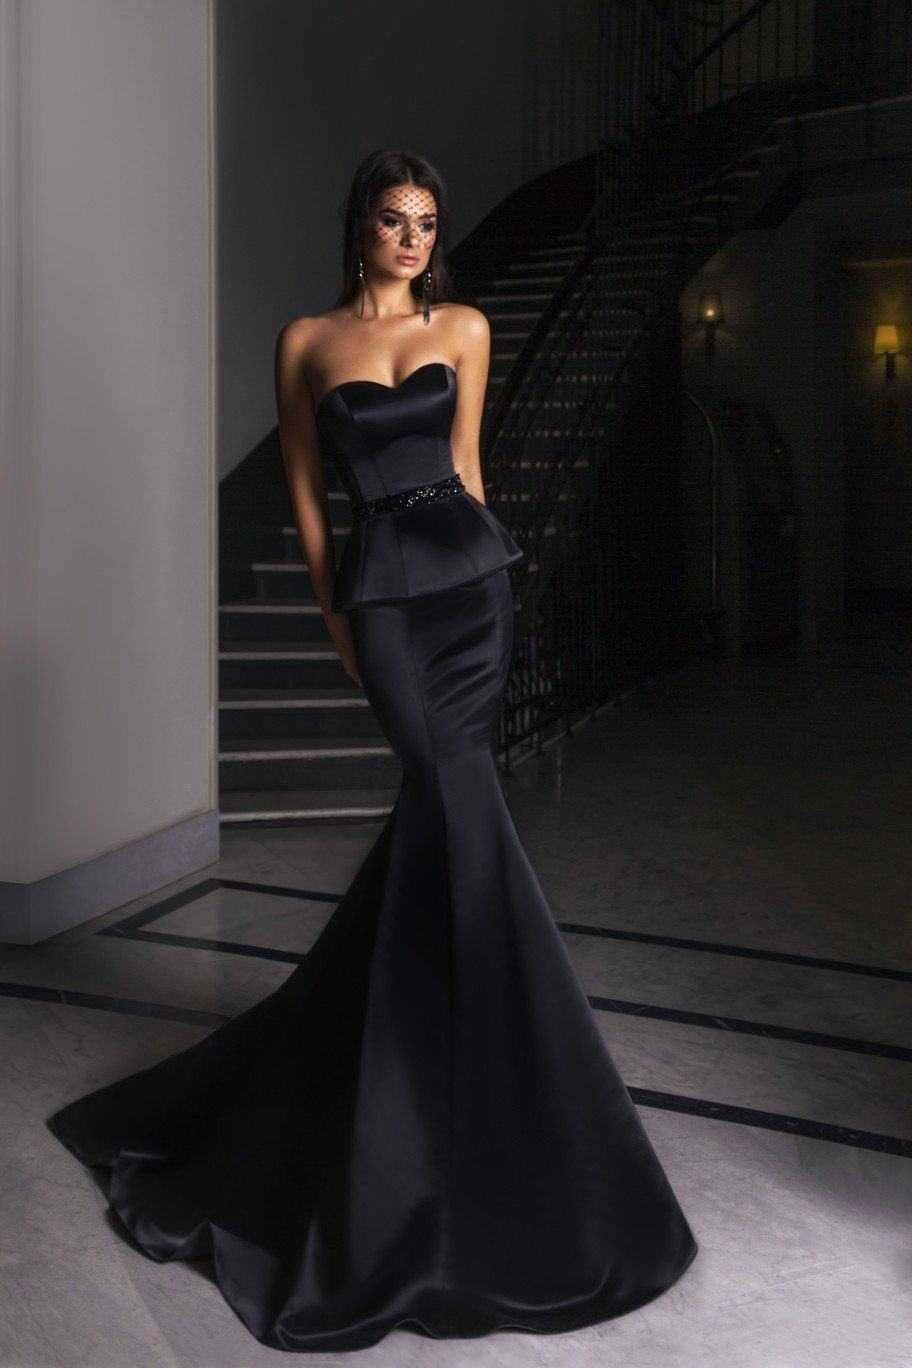 Top 10 Ideas For New Year’s Eve Dresses 2021